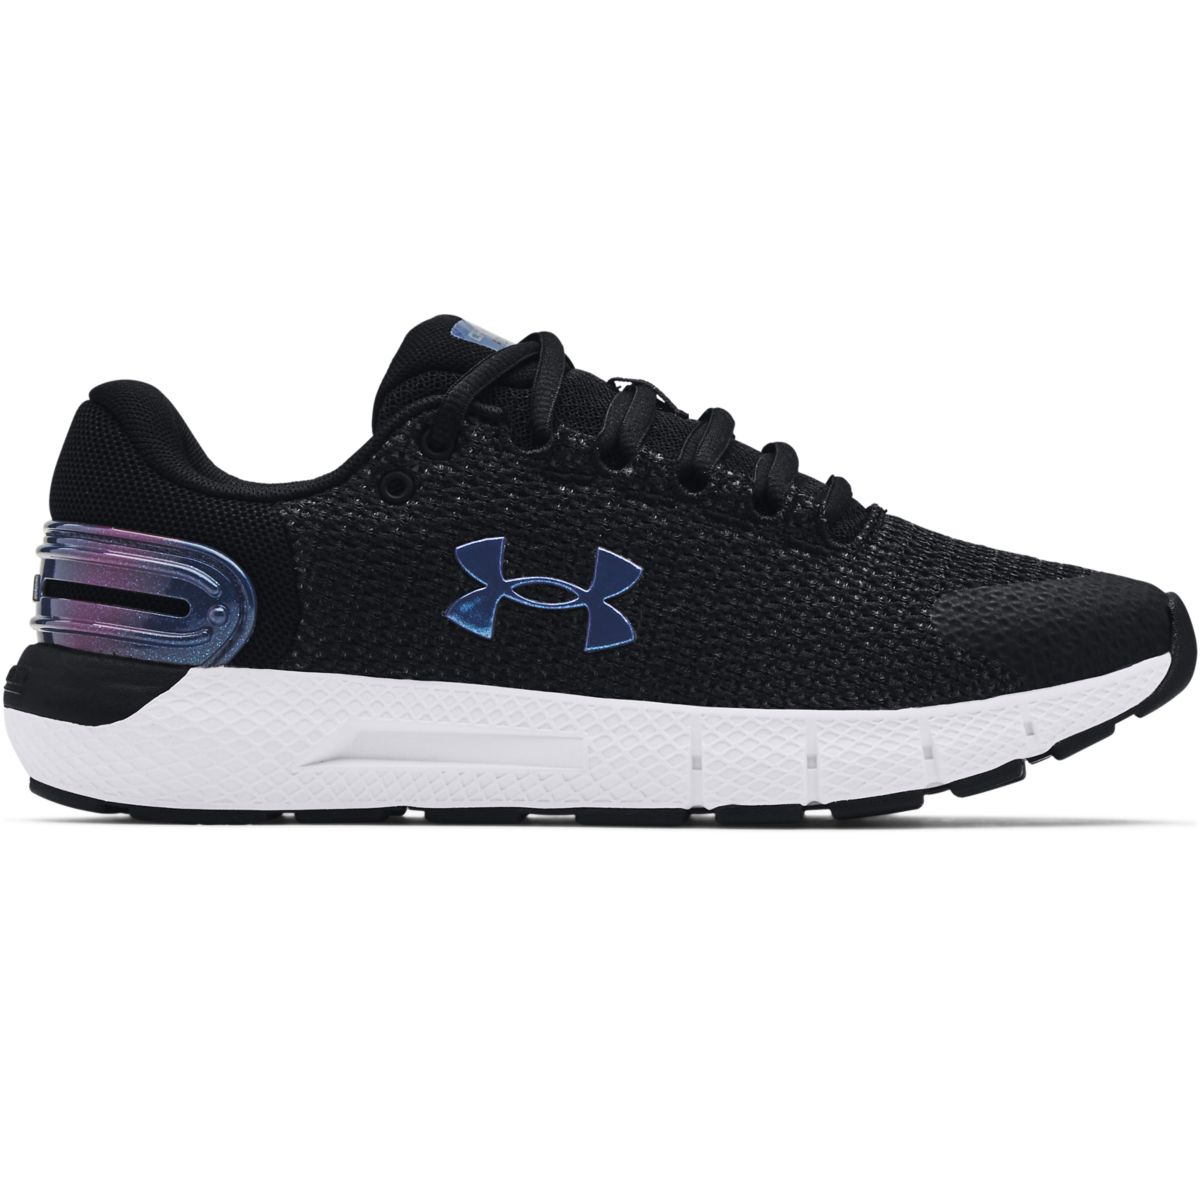 Under Armour Charged Rogue 2.5 ClrSft Women's Running Shoes